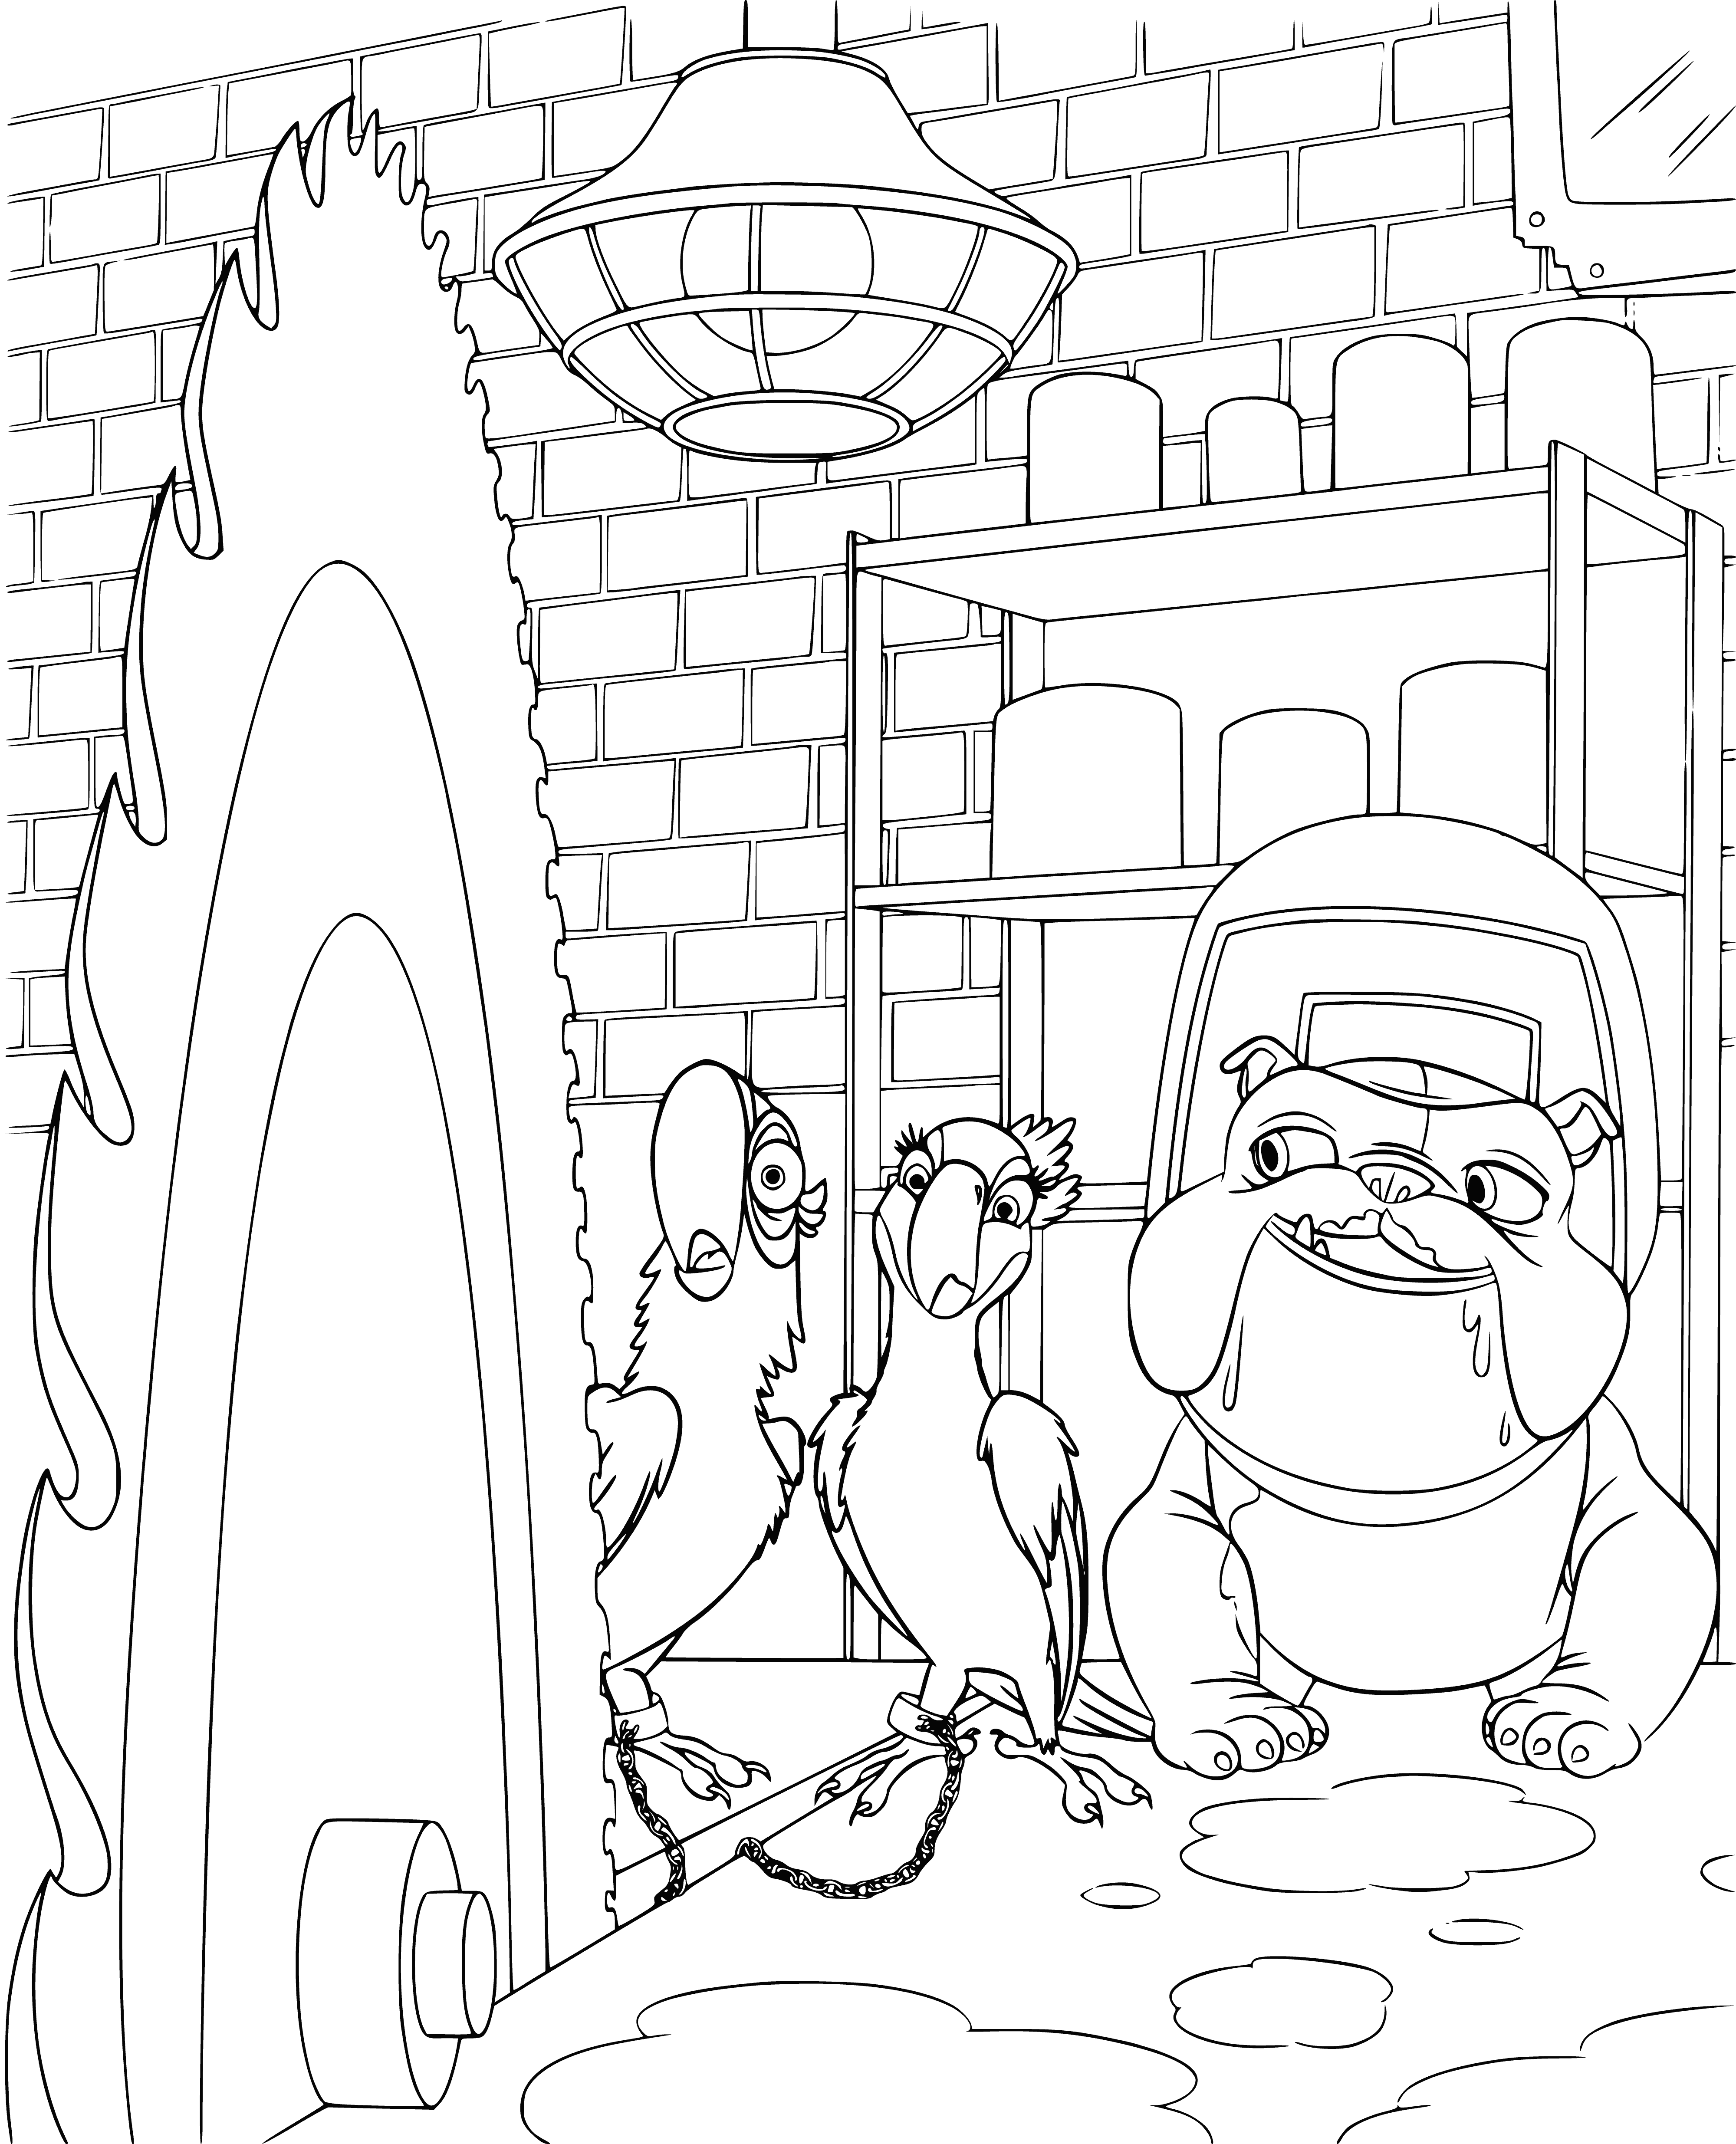 coloring page: Big green gator in center of page, small brown one in bottom left corner, both with sharp teeth and open mouths. #color